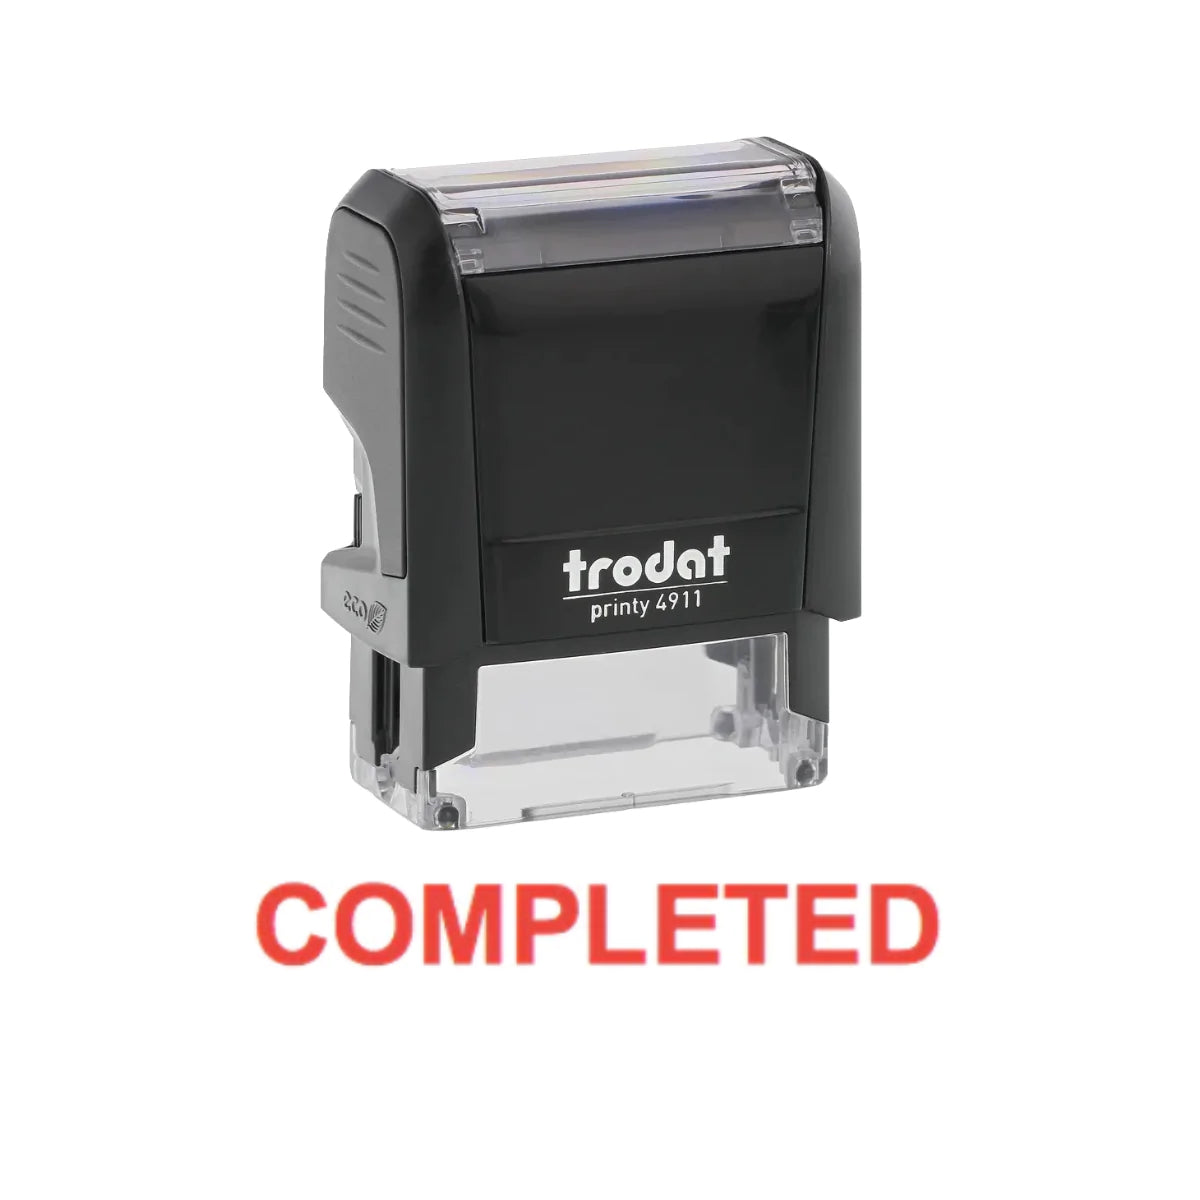 Trodat Printy 4911 Stamp 'COMPLETED'